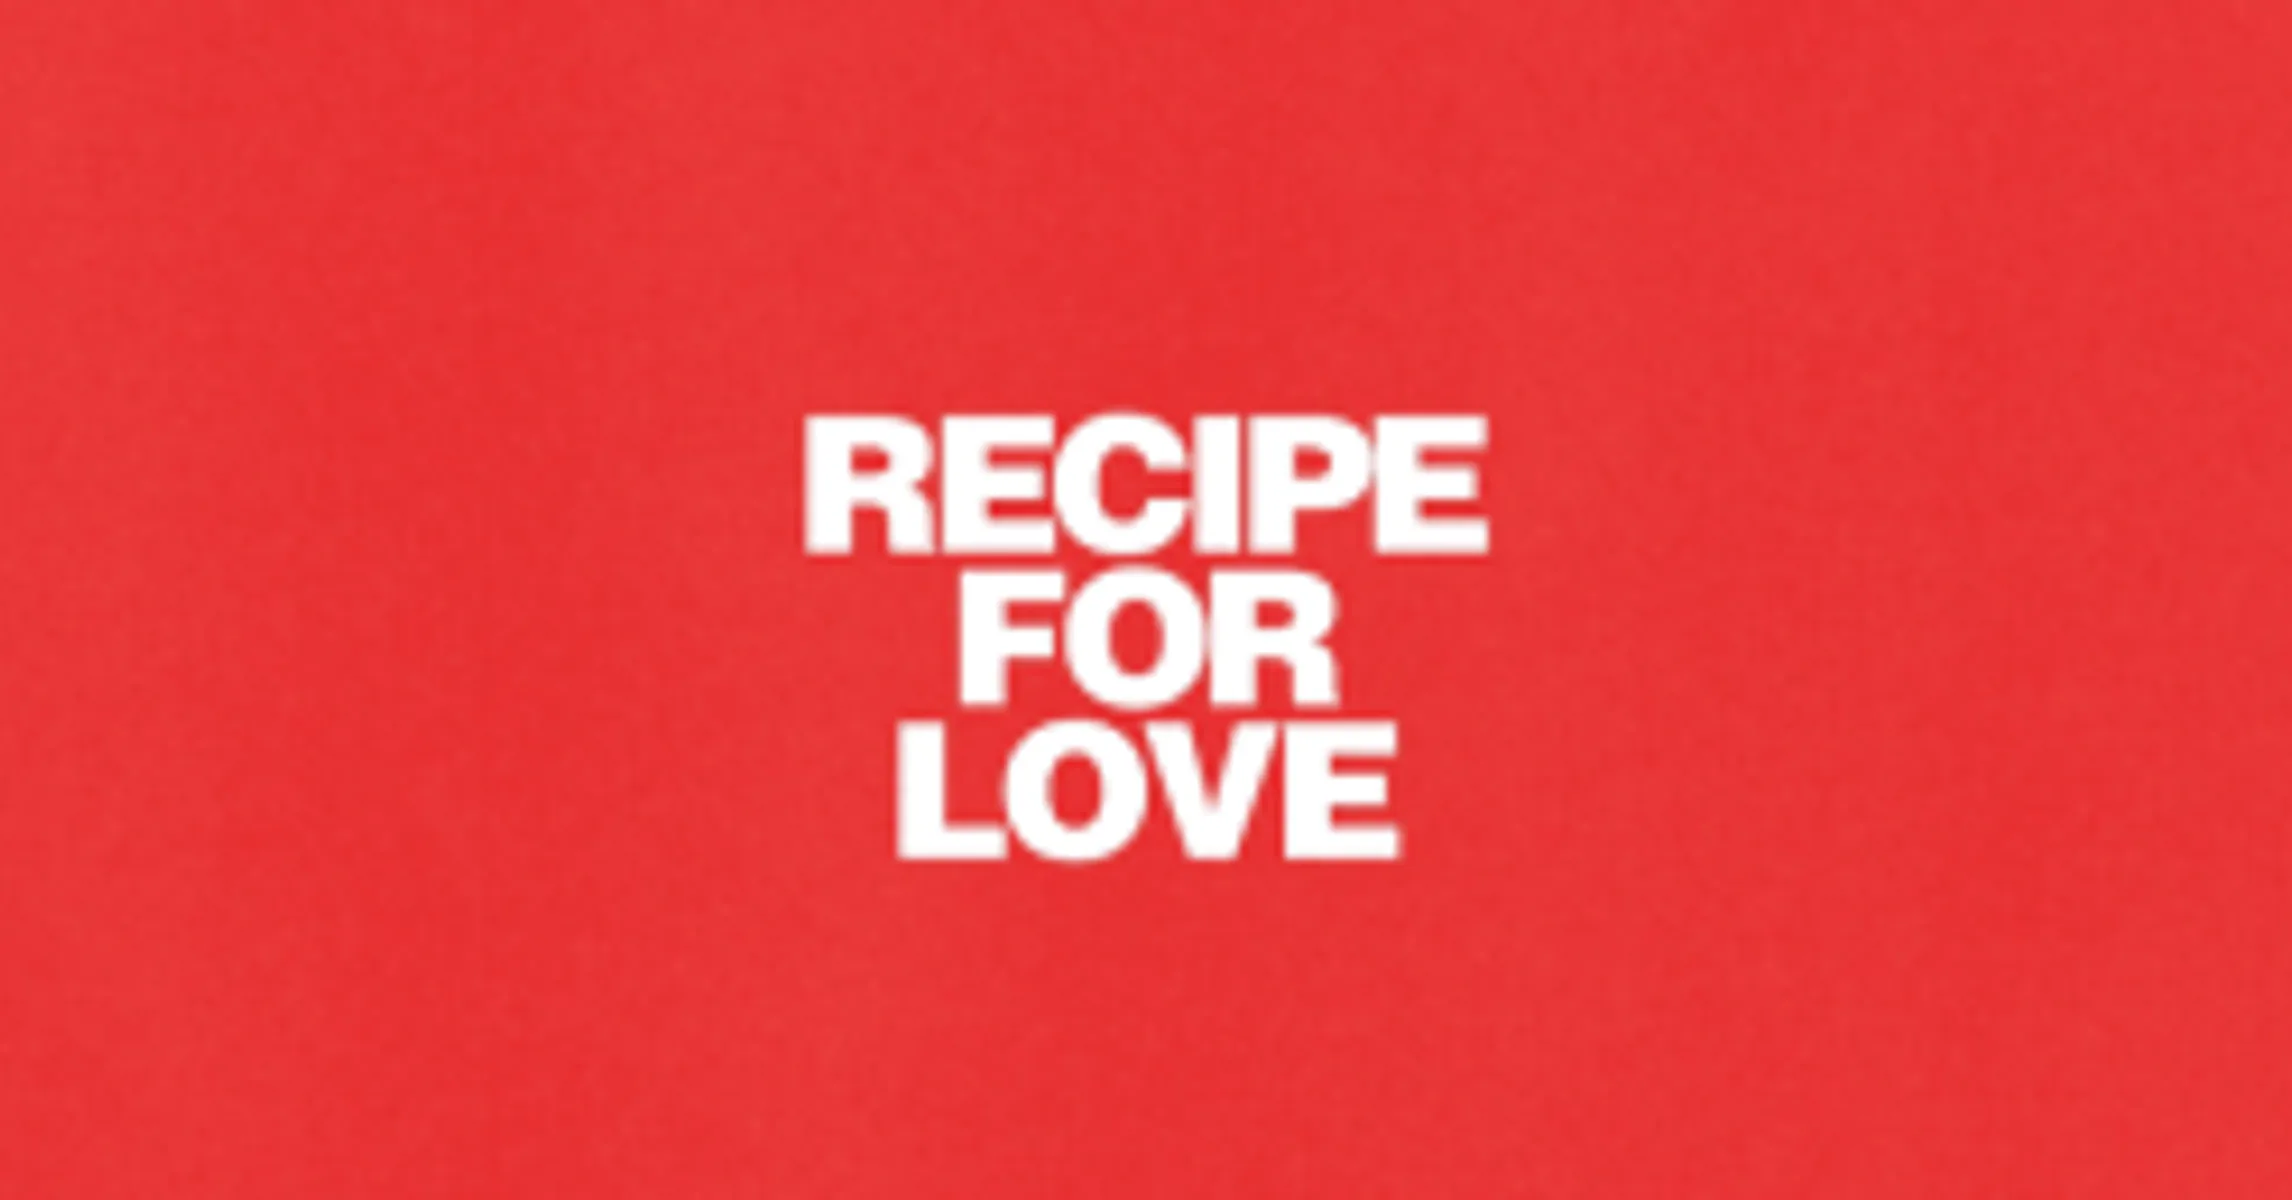 Strick & Future Finally Release Their Collab "RECIPE FOR LOVE"